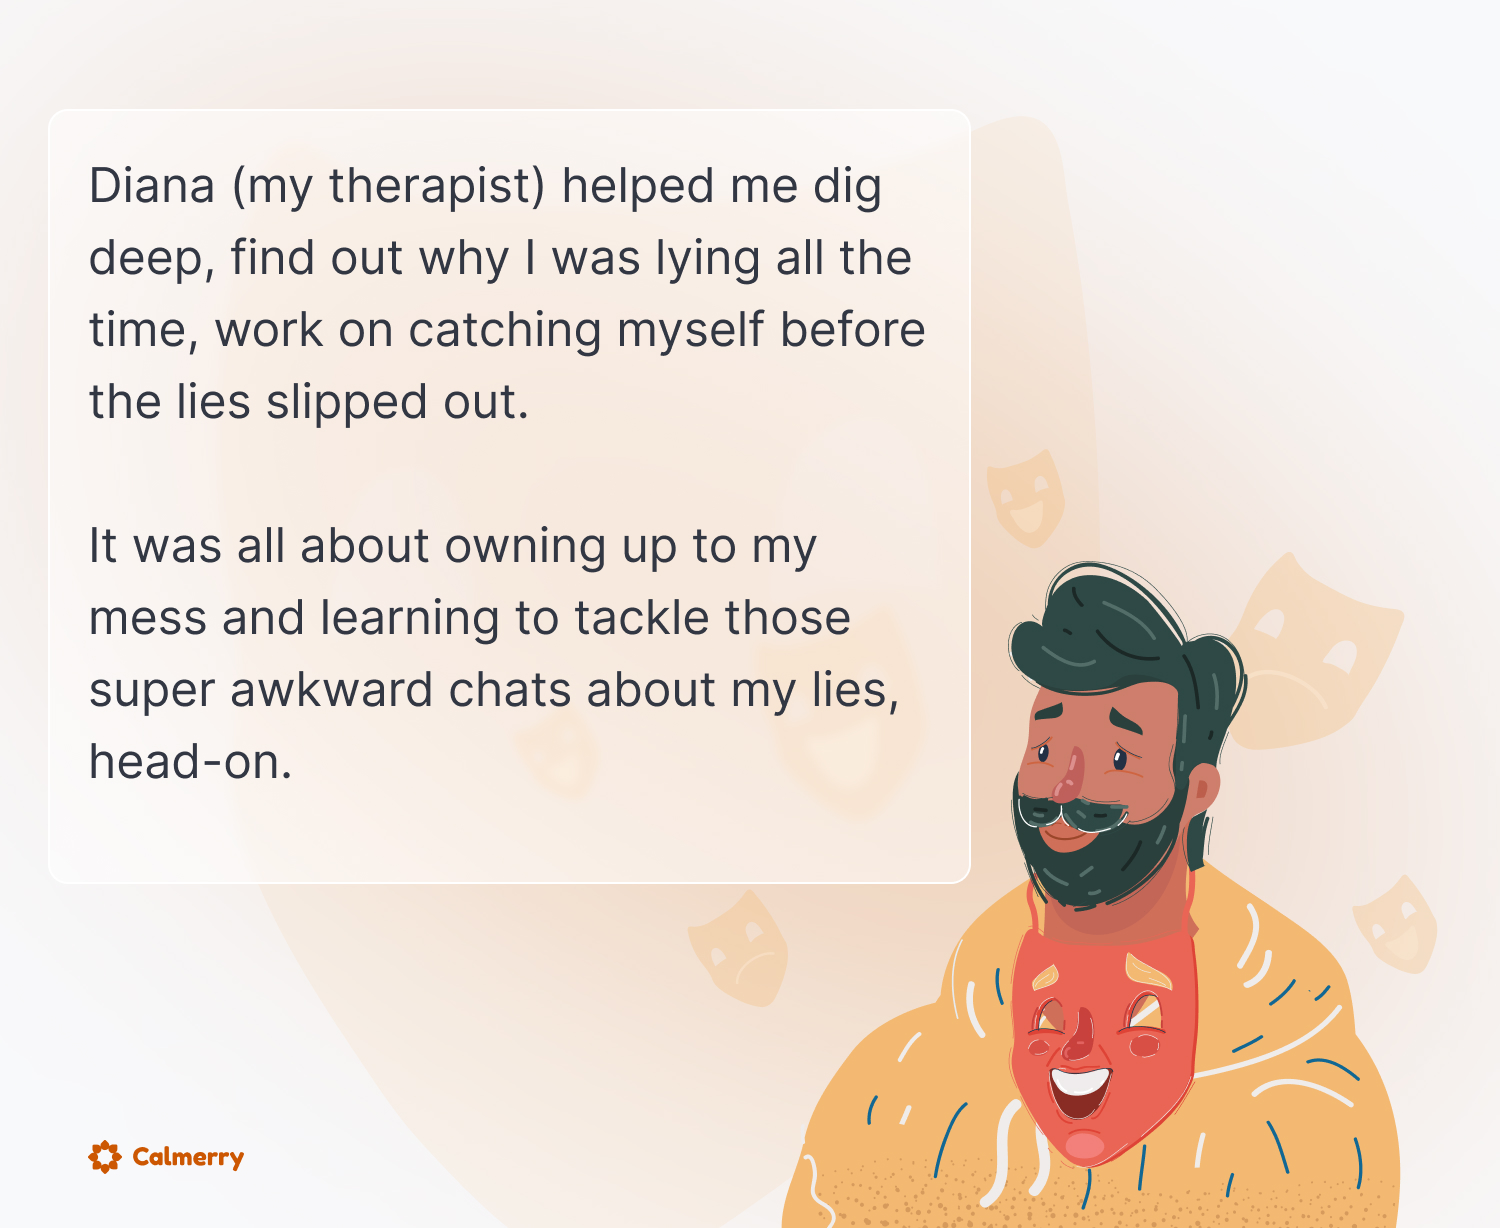 Illustration from 'Calmerry Journeys' of a man in a yellow sweater with a contemplative expression, overlaid with a transparent orange mask showing a smile. Text box shares his reflection on working with his therapist Diana to confront and discuss his habit of lying.